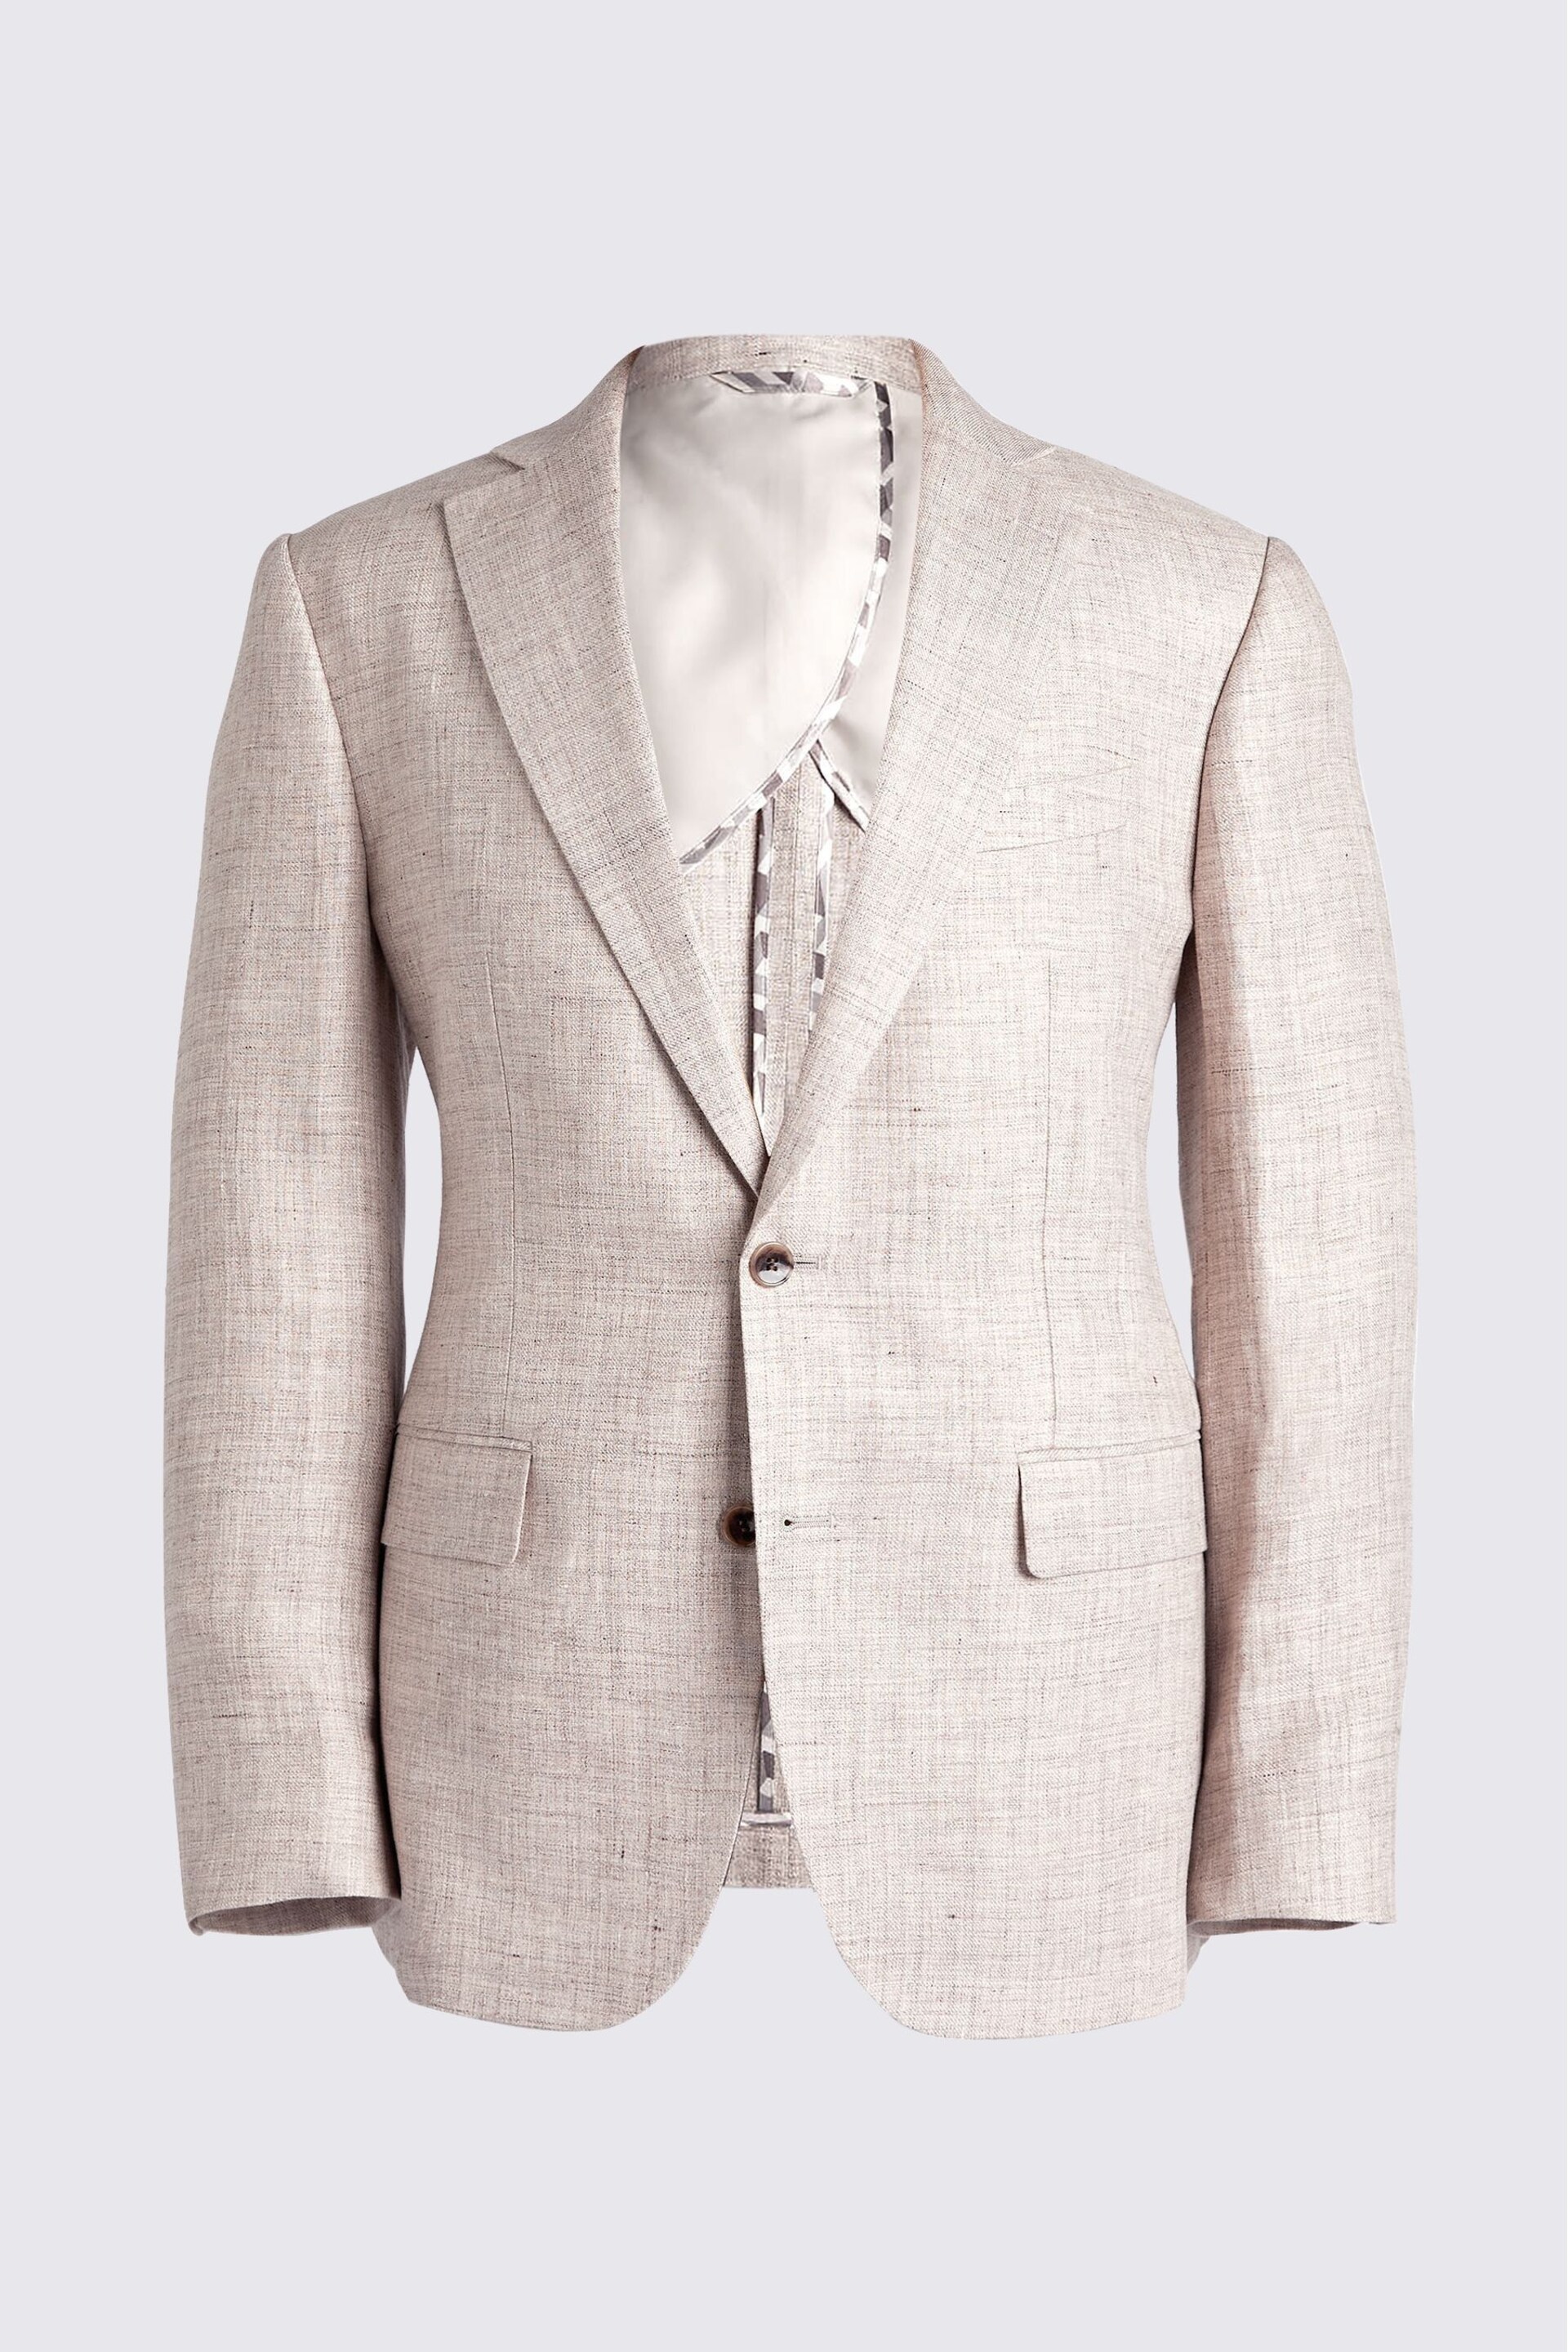 MOSS Tailored Fit Oatmeal Linen Suit: Jacket - Image 8 of 8